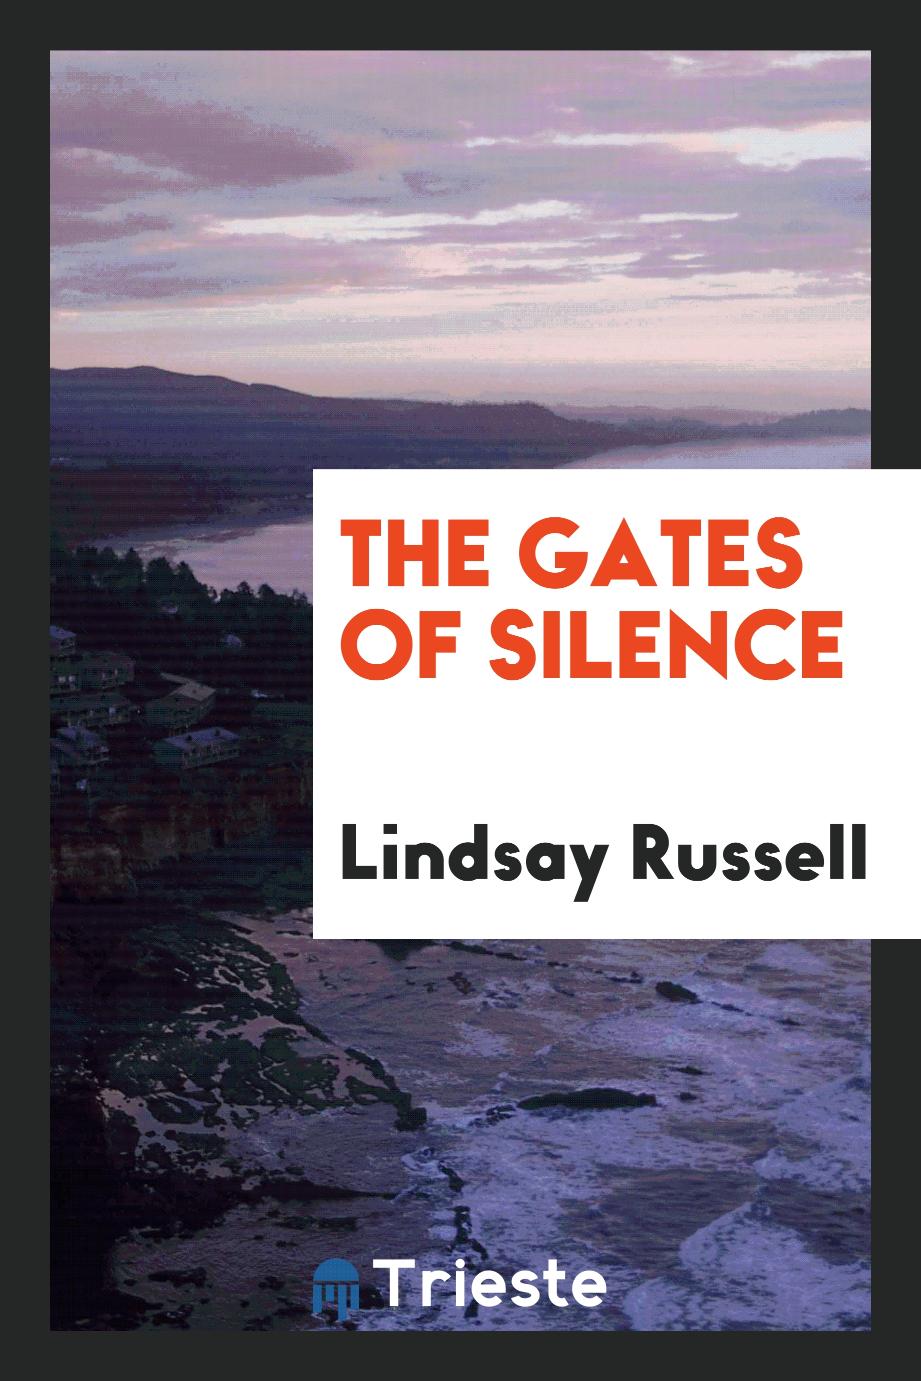 The Gates of Silence